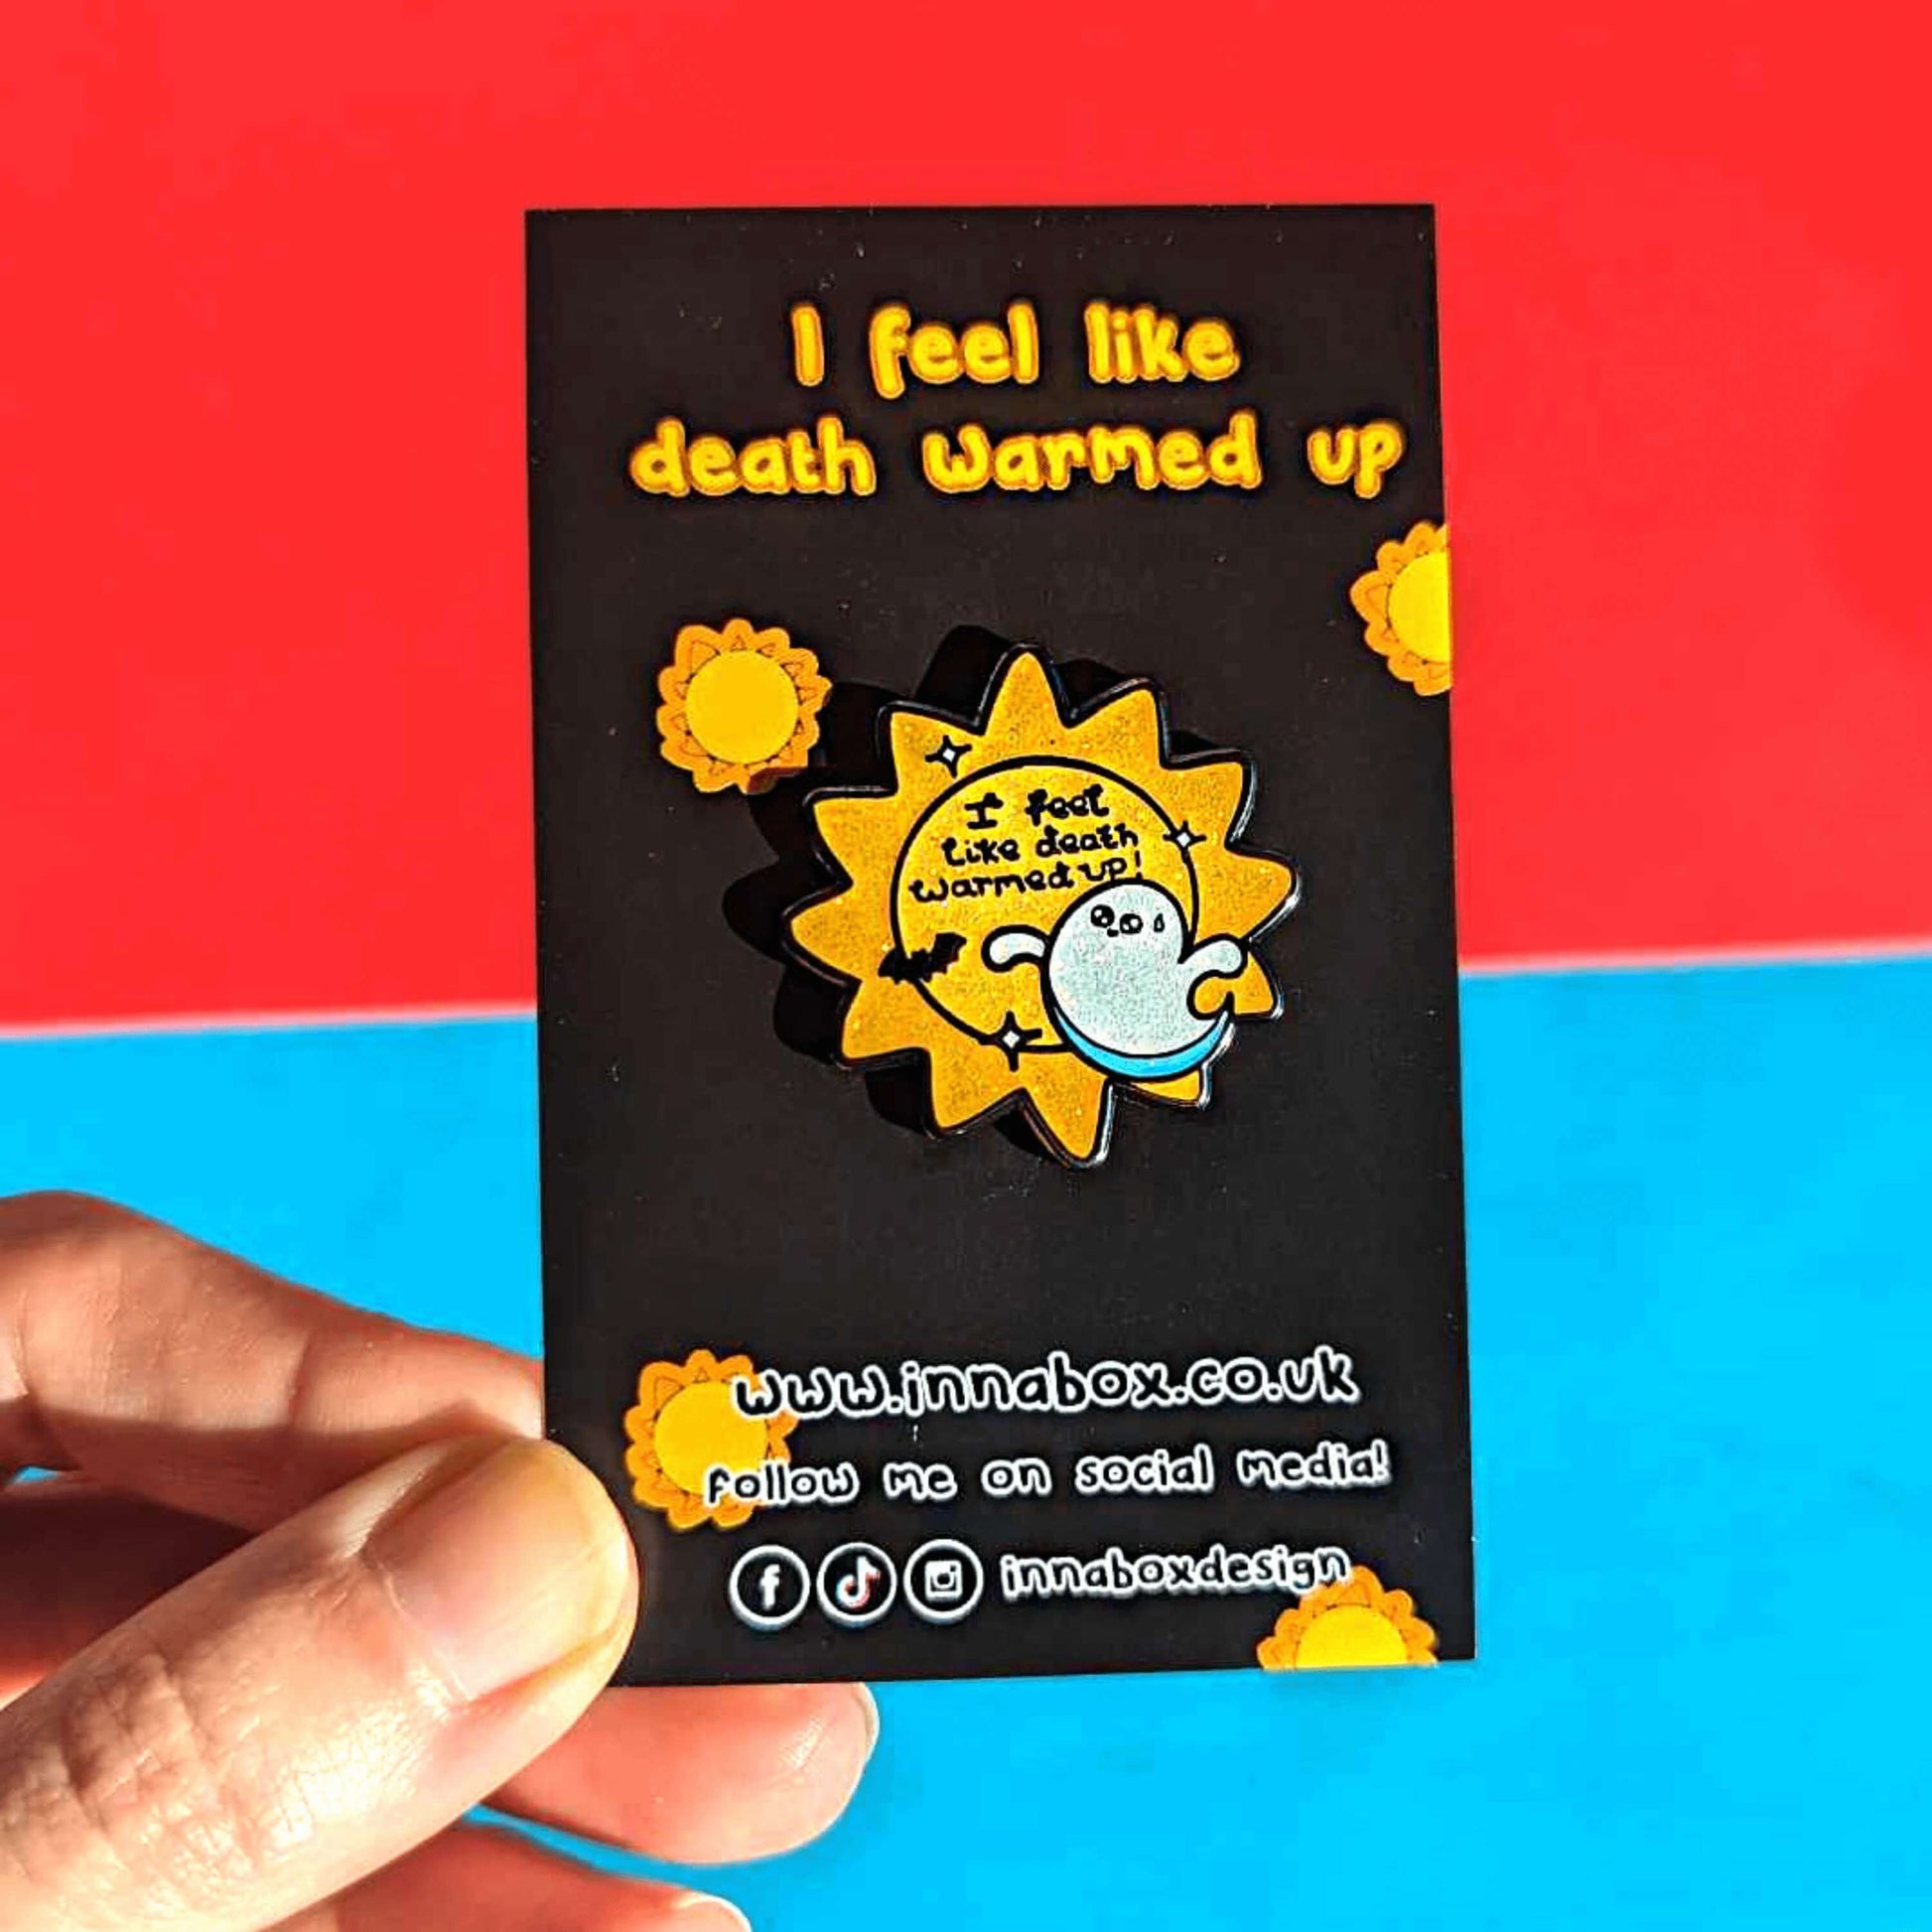 Hand holding Death Warmed Up Halloween Pin on black backing card with yellow sunshines, yellow top text reading 'I feel like death warmed up' and white bottom text of the innabox social media handles. The pin is glittery, yellow and sun shaped with 'I feel like death warmed up!' written in the middle of the sun in black writing and white sparkles around it. There is also a little black bat underneath the writing and a cute white ghost with big eyes, a little smile and a sweat droplet on it's forehead.